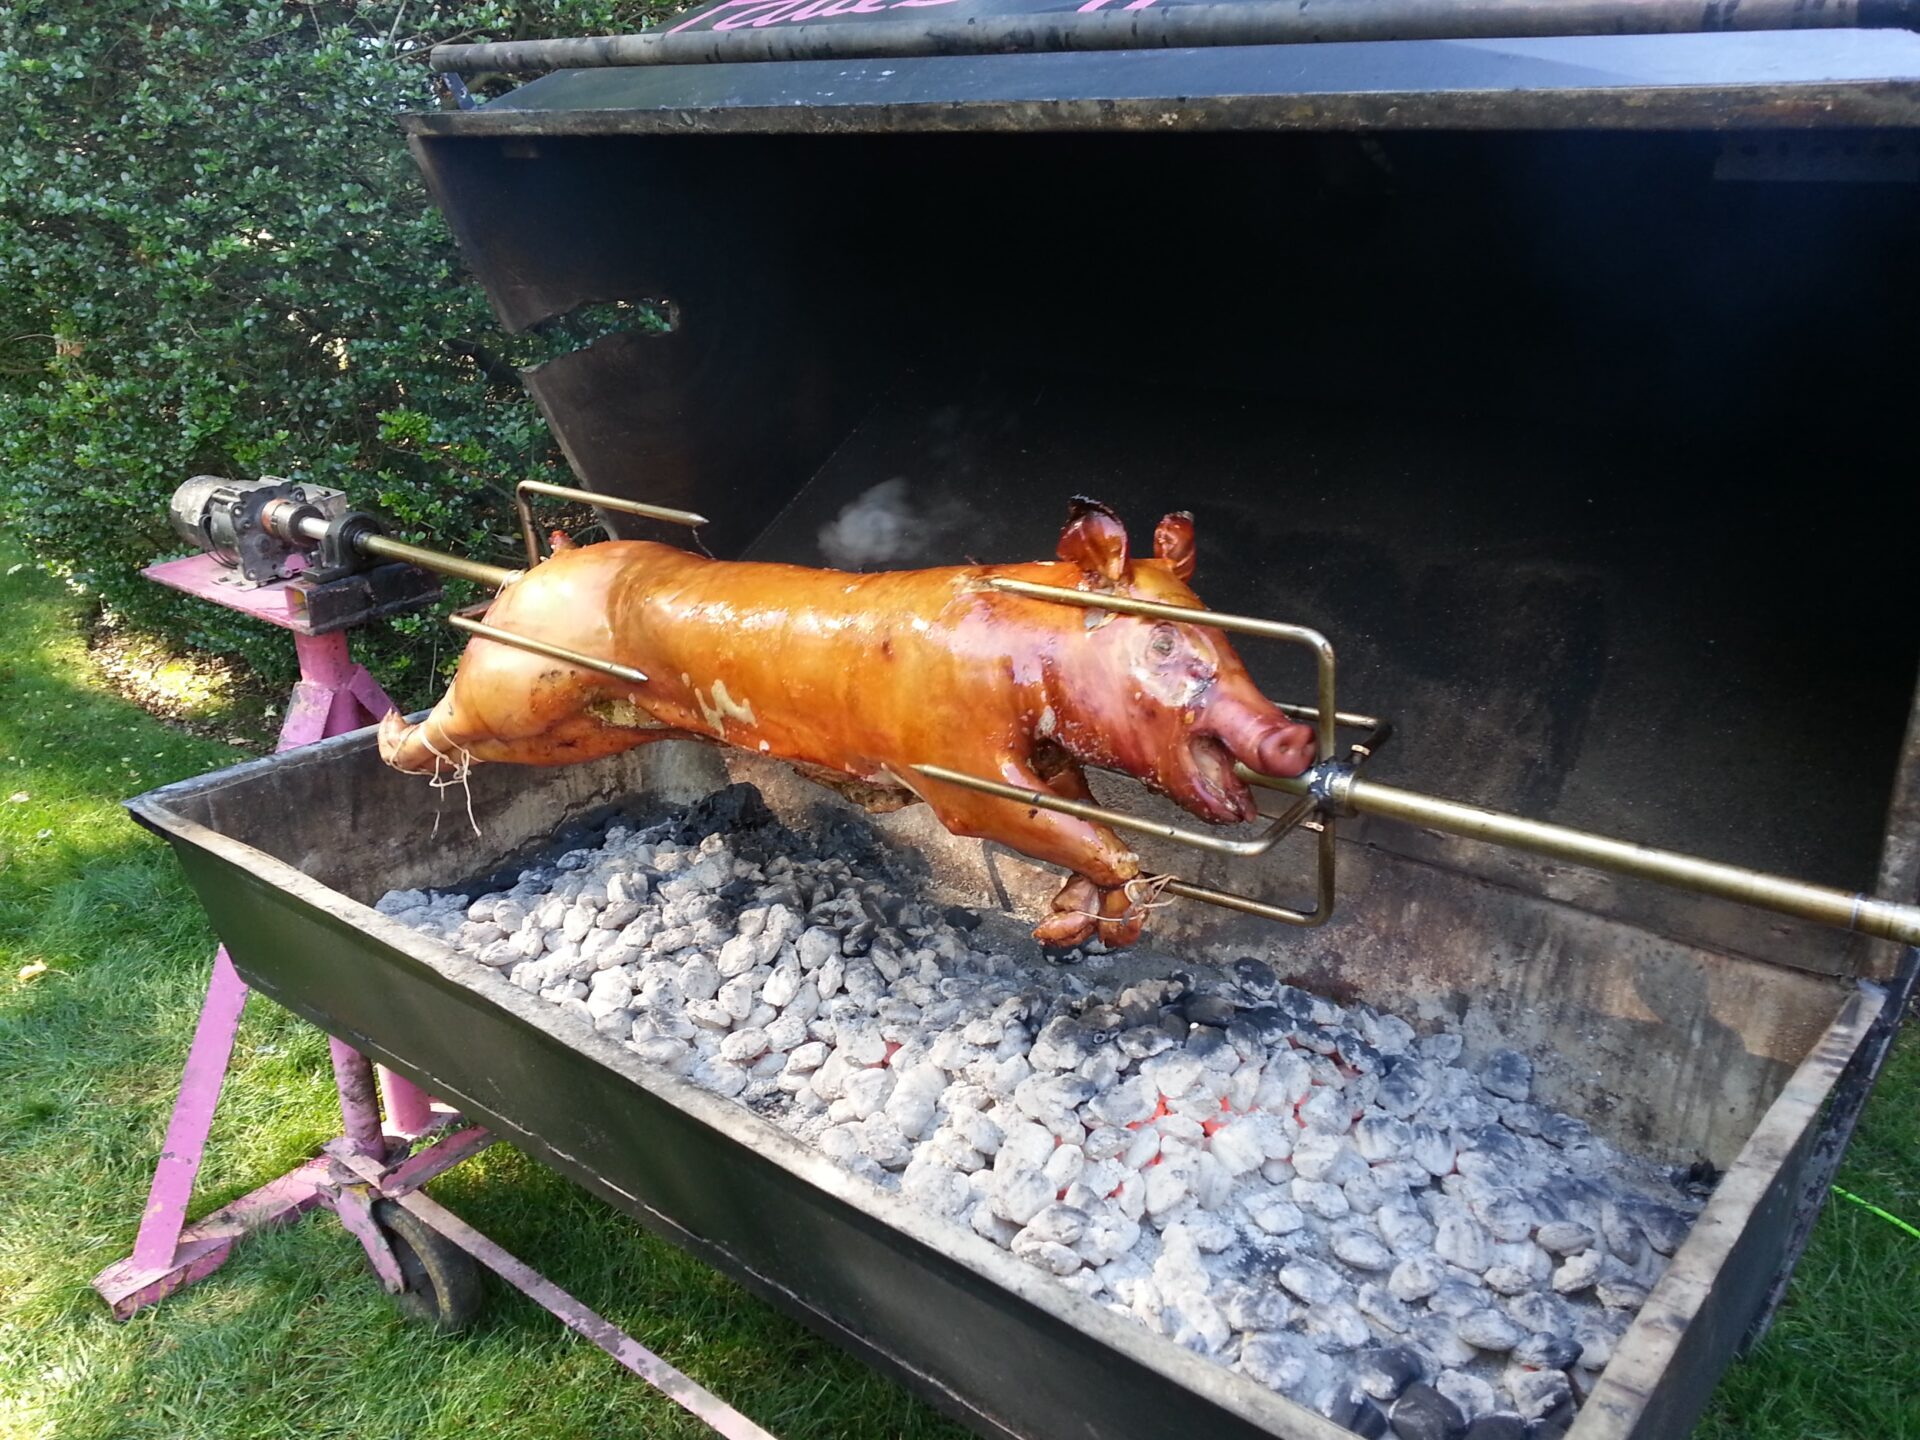 A pig is being cooked on the grill.